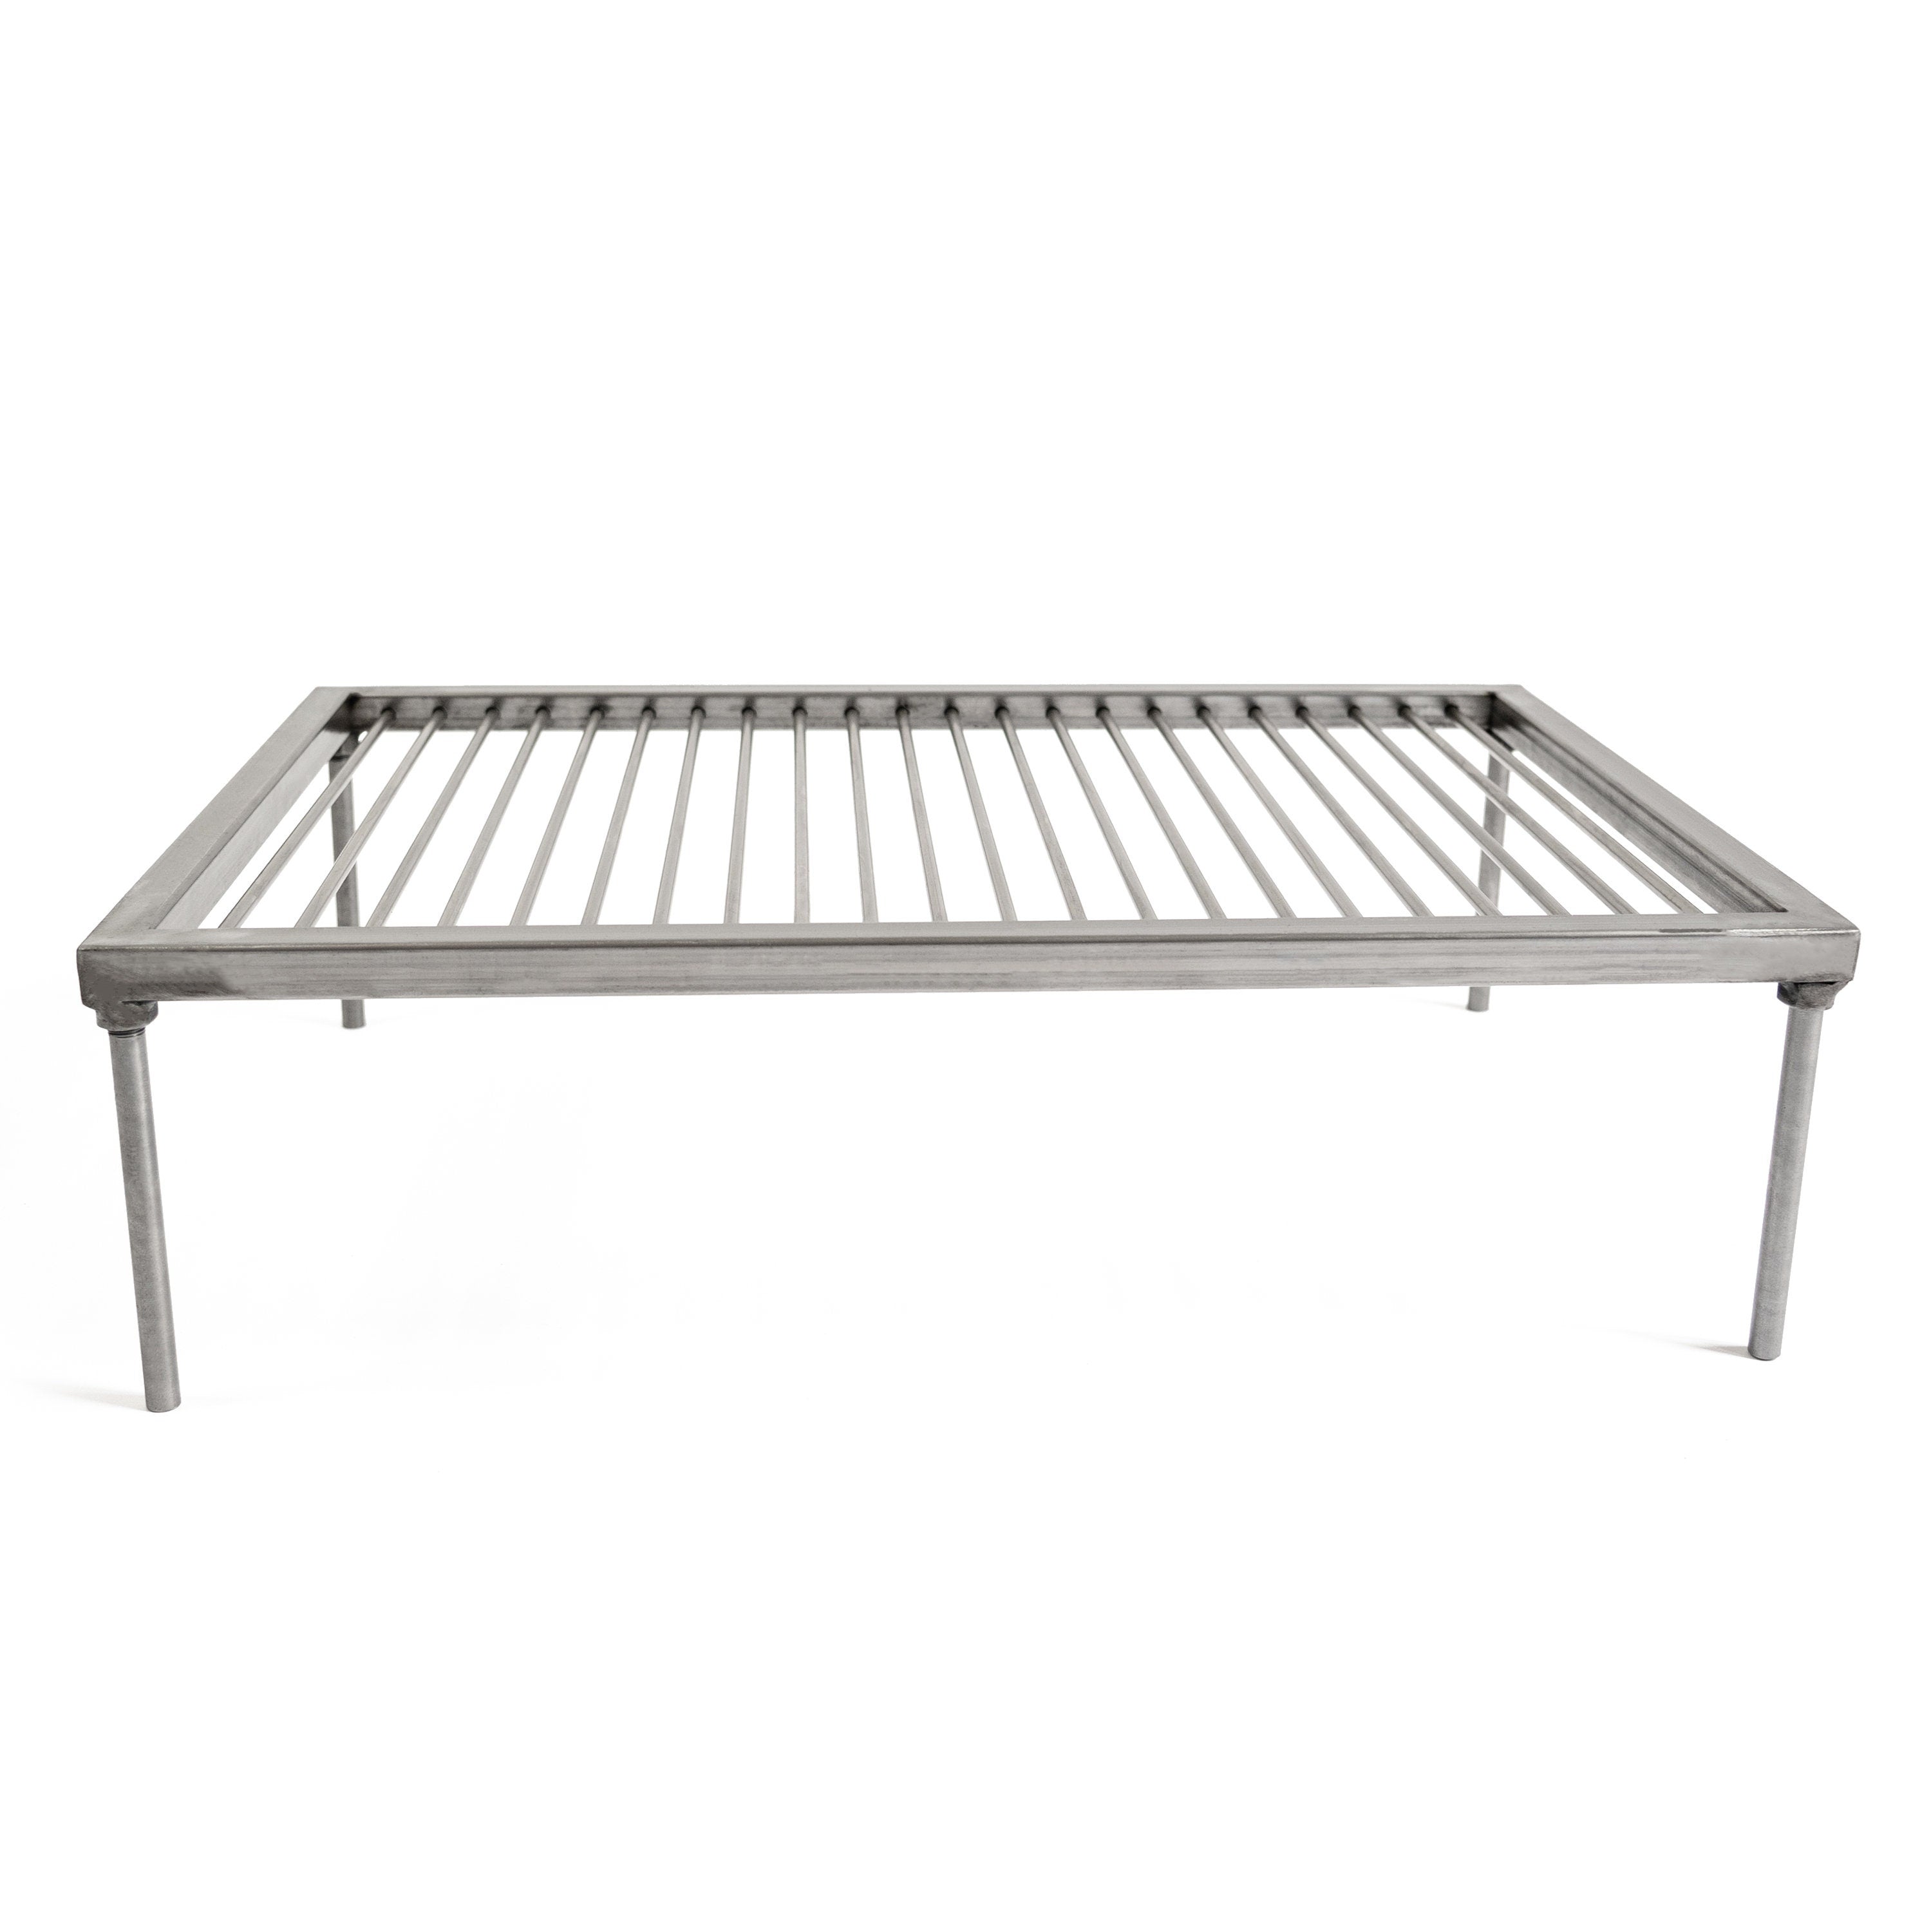 Gaucholife Grill Small Stainless Steel & Steel Grill